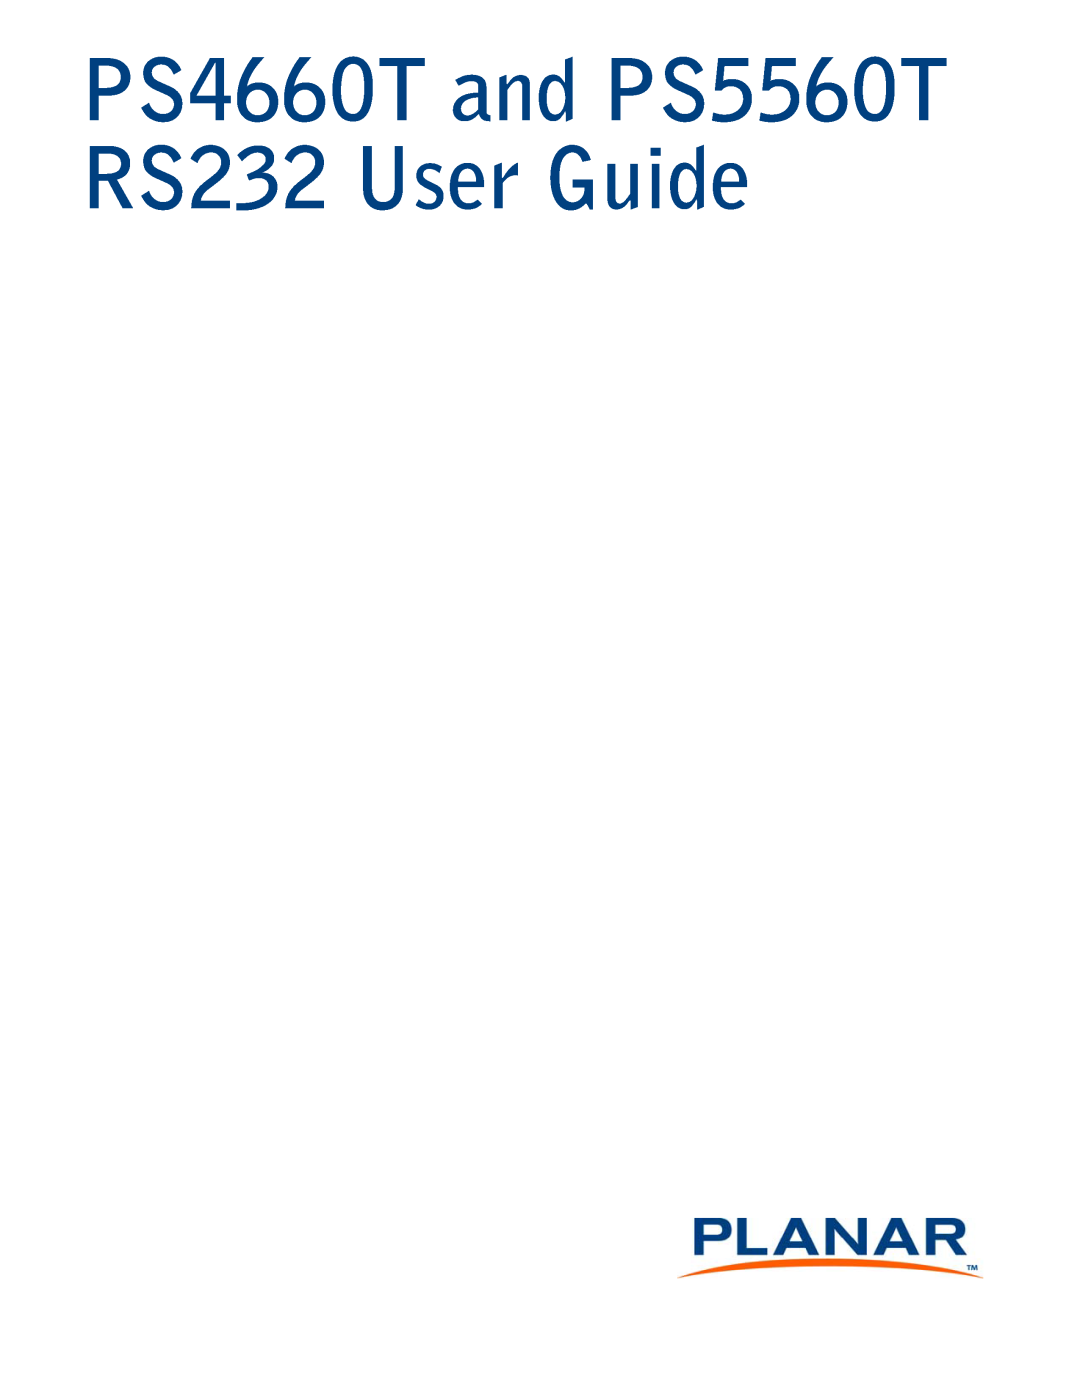 Planar PS5660T manual PS4660T and PS5560T RS232 User Guide 